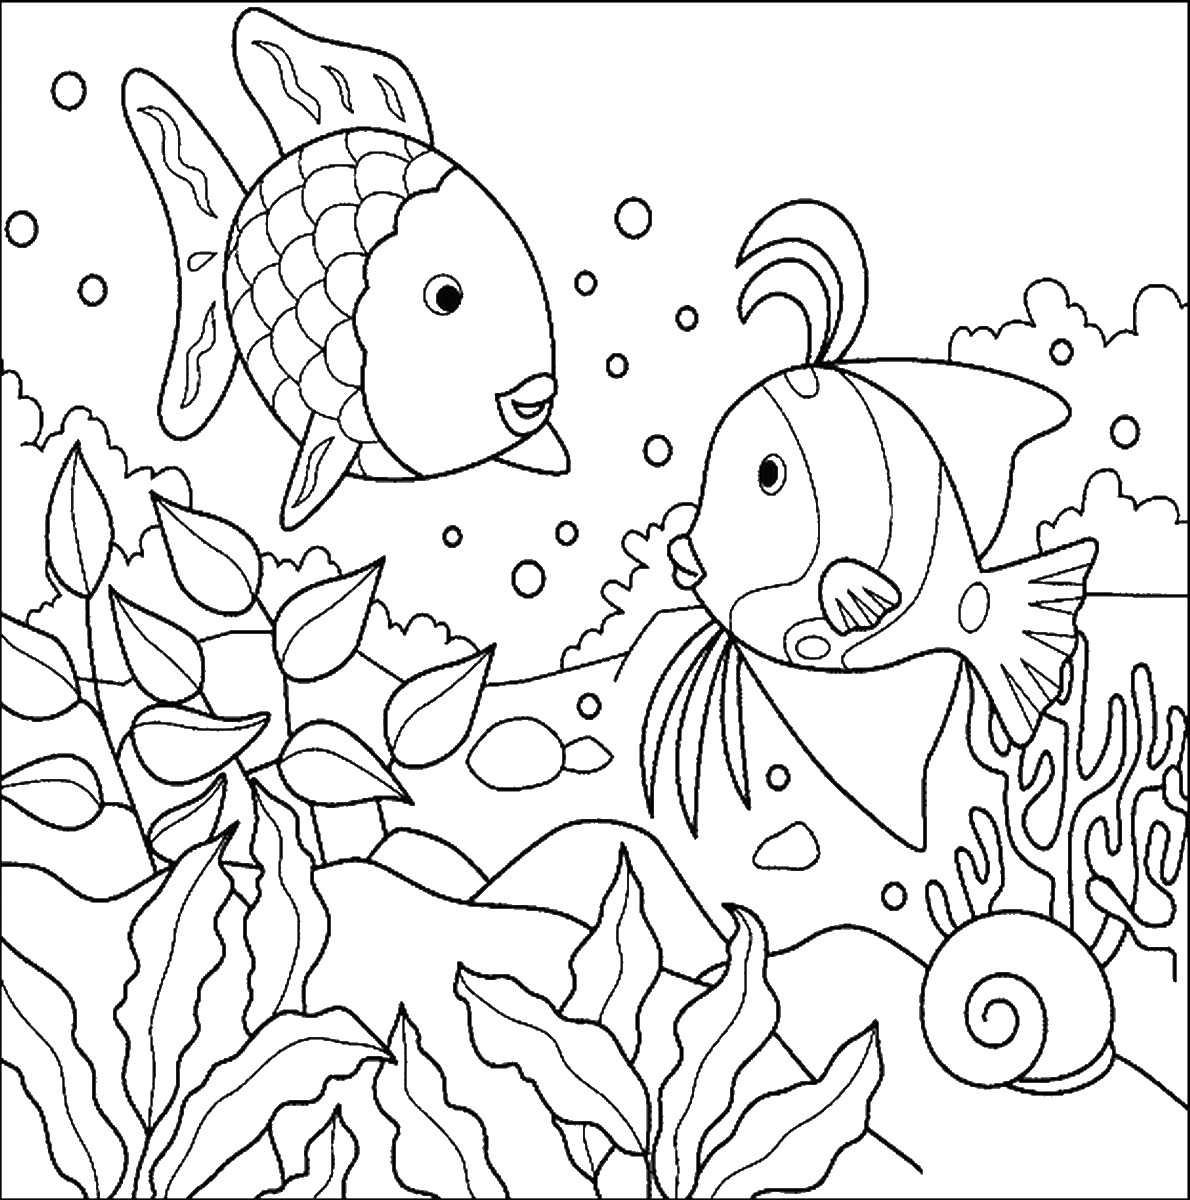 Coloring Pages Fish For Kids
 Fish Coloring Pages